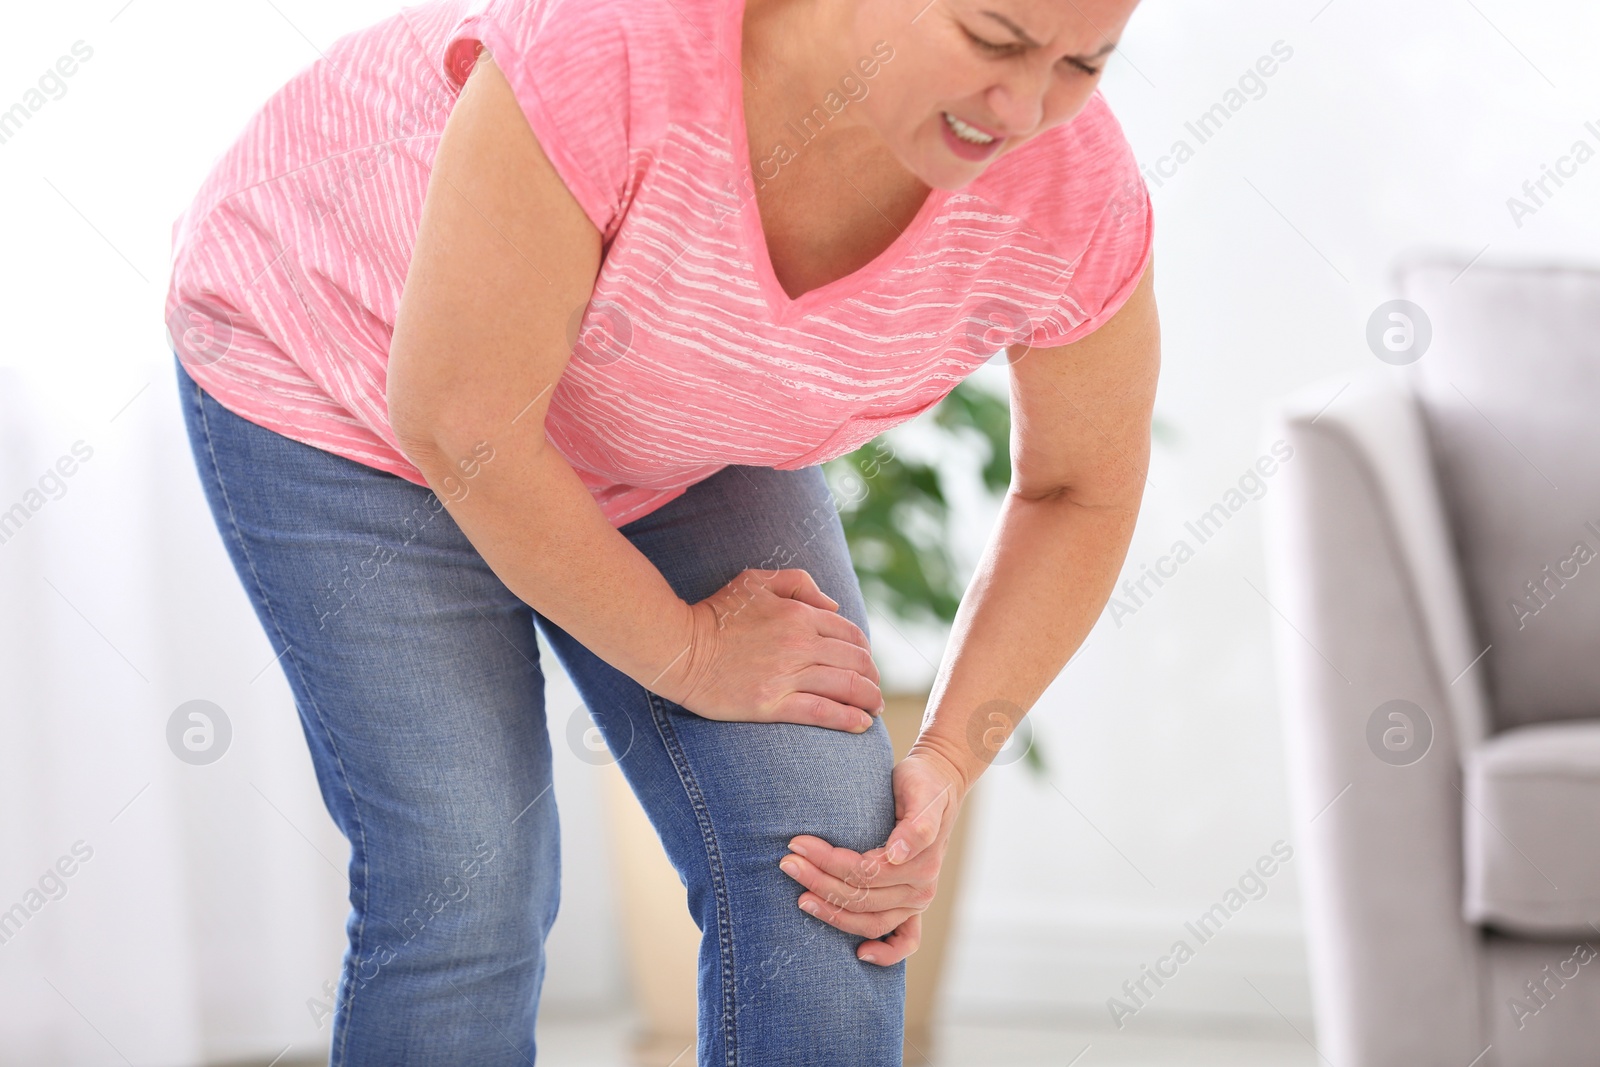 Photo of Senior woman suffering from knee pain at home, closeup